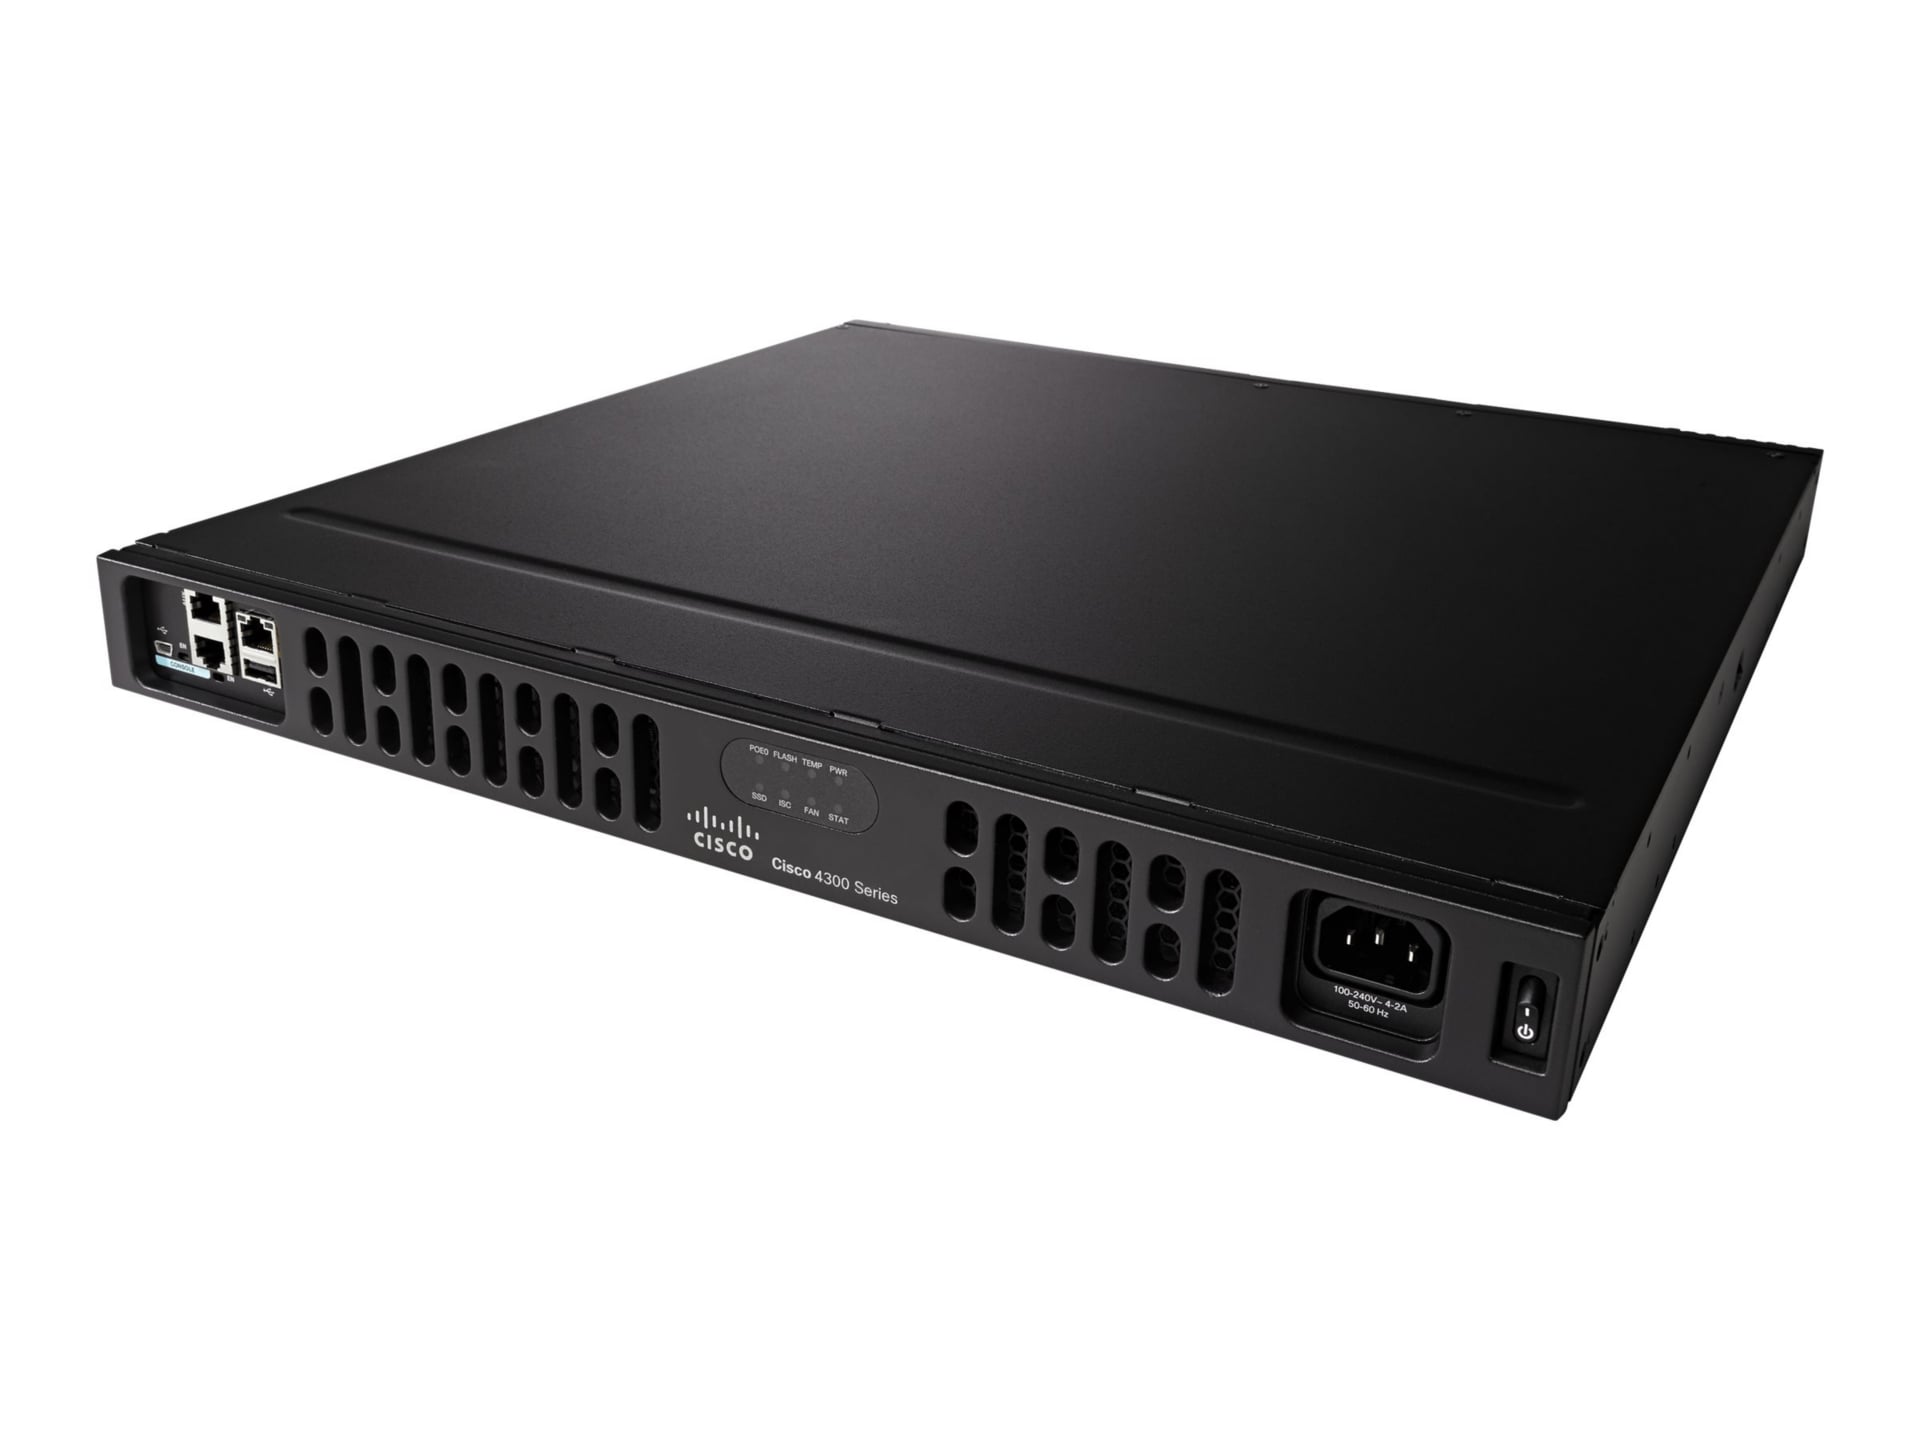 Cisco Integrated Services Router 4331 - router - rack-mountable